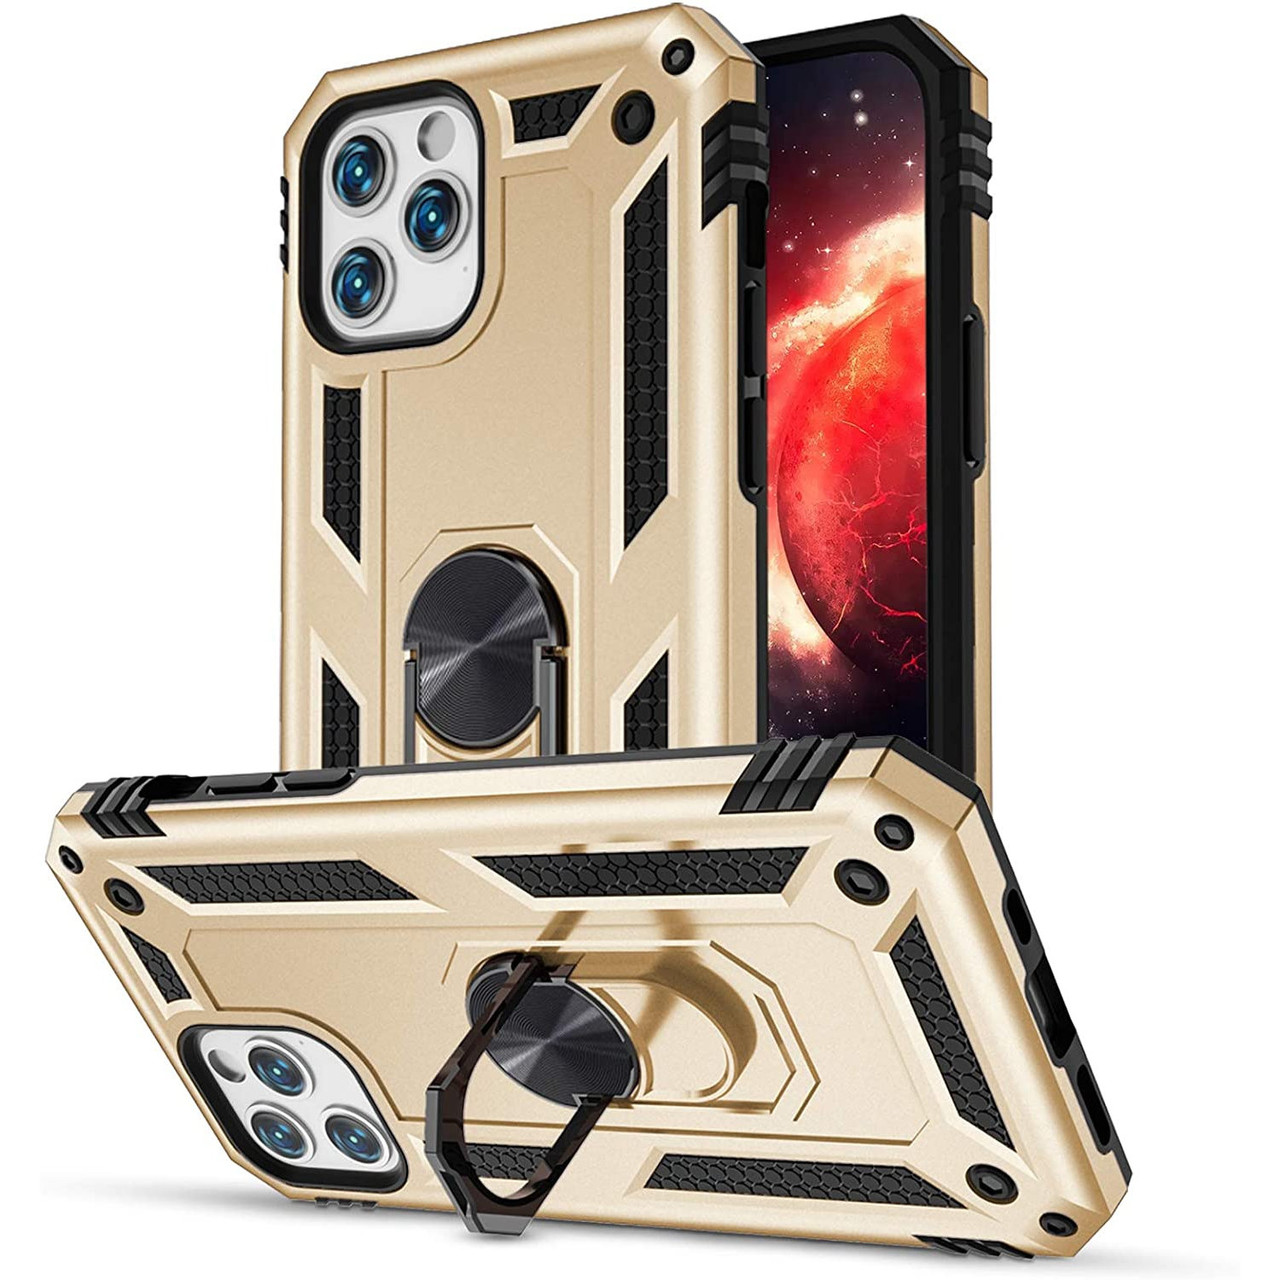 Finger Loop Armor Hybrid Case With 360 Rotating Ring Holder Kickstand For Iphone 12 Pro Max Gold Hd Accessory